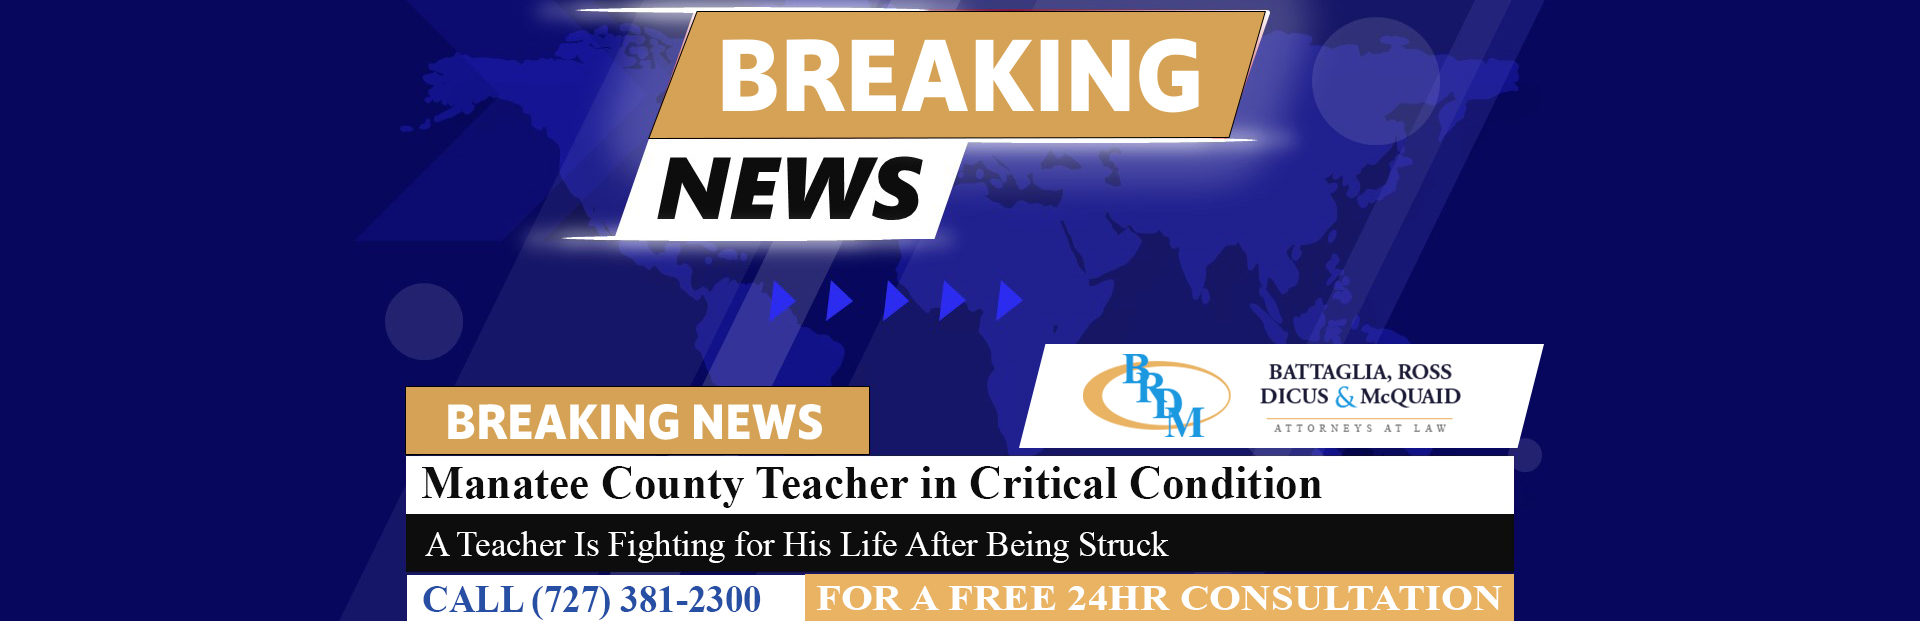 [06-06-23] Manatee County Teacher in Critical Condition After Tragic Accident